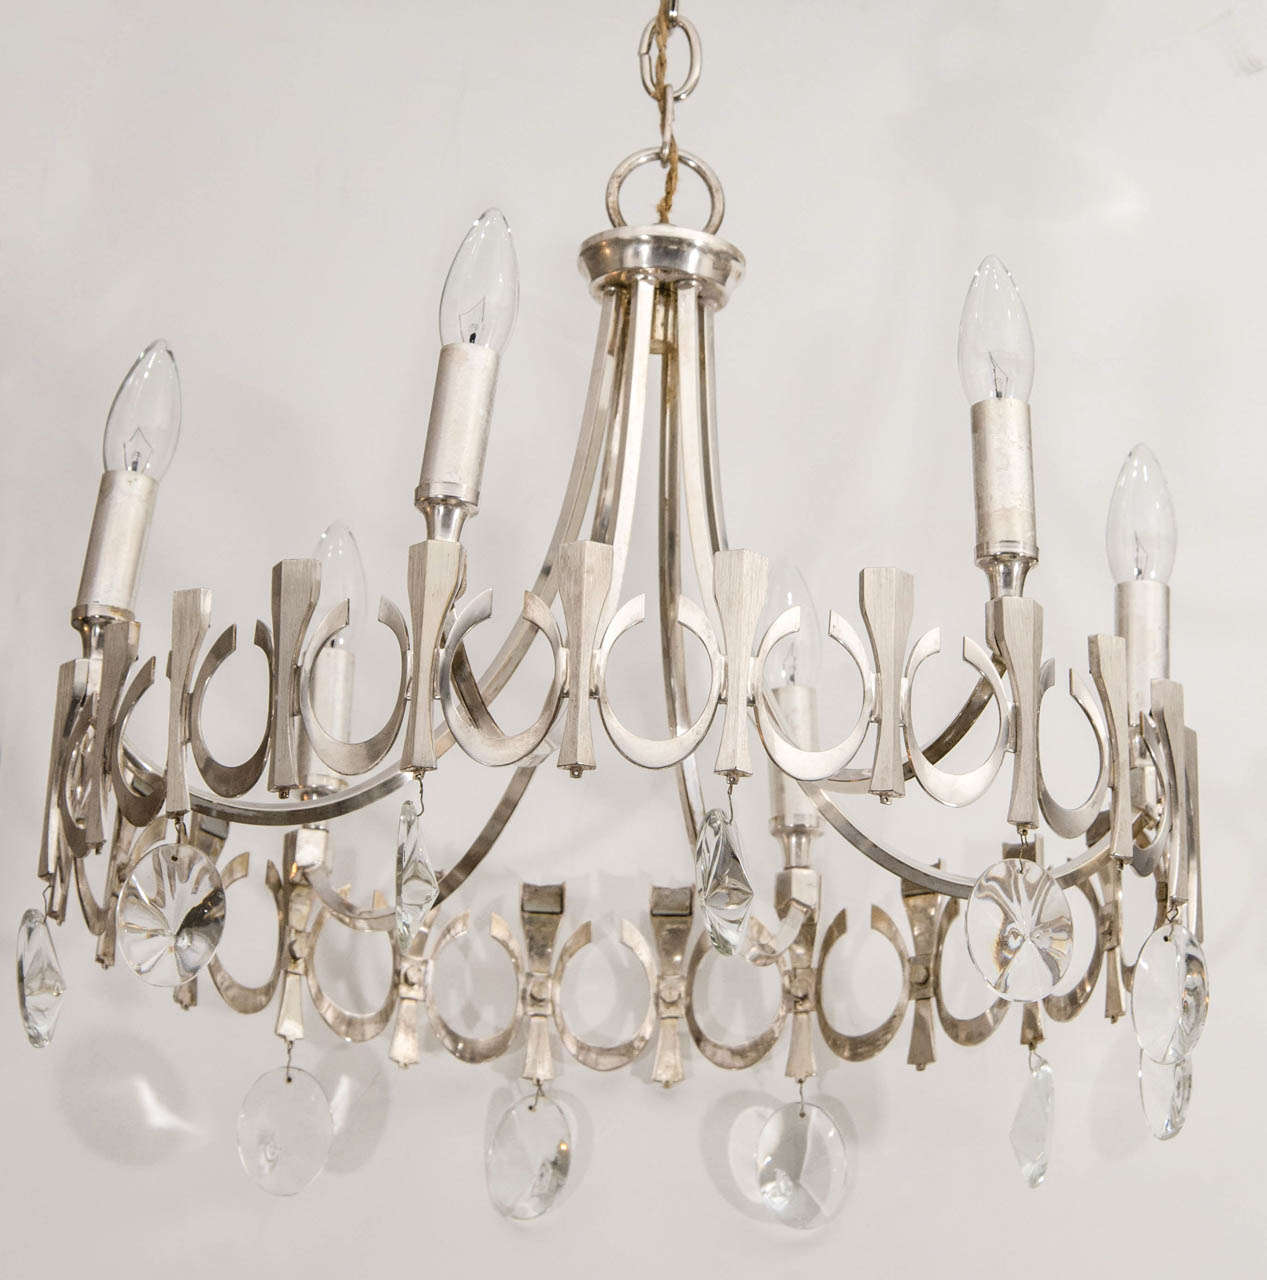 A light and airy six-arm chandelier, possibly Scoliari, with hanging crystals.